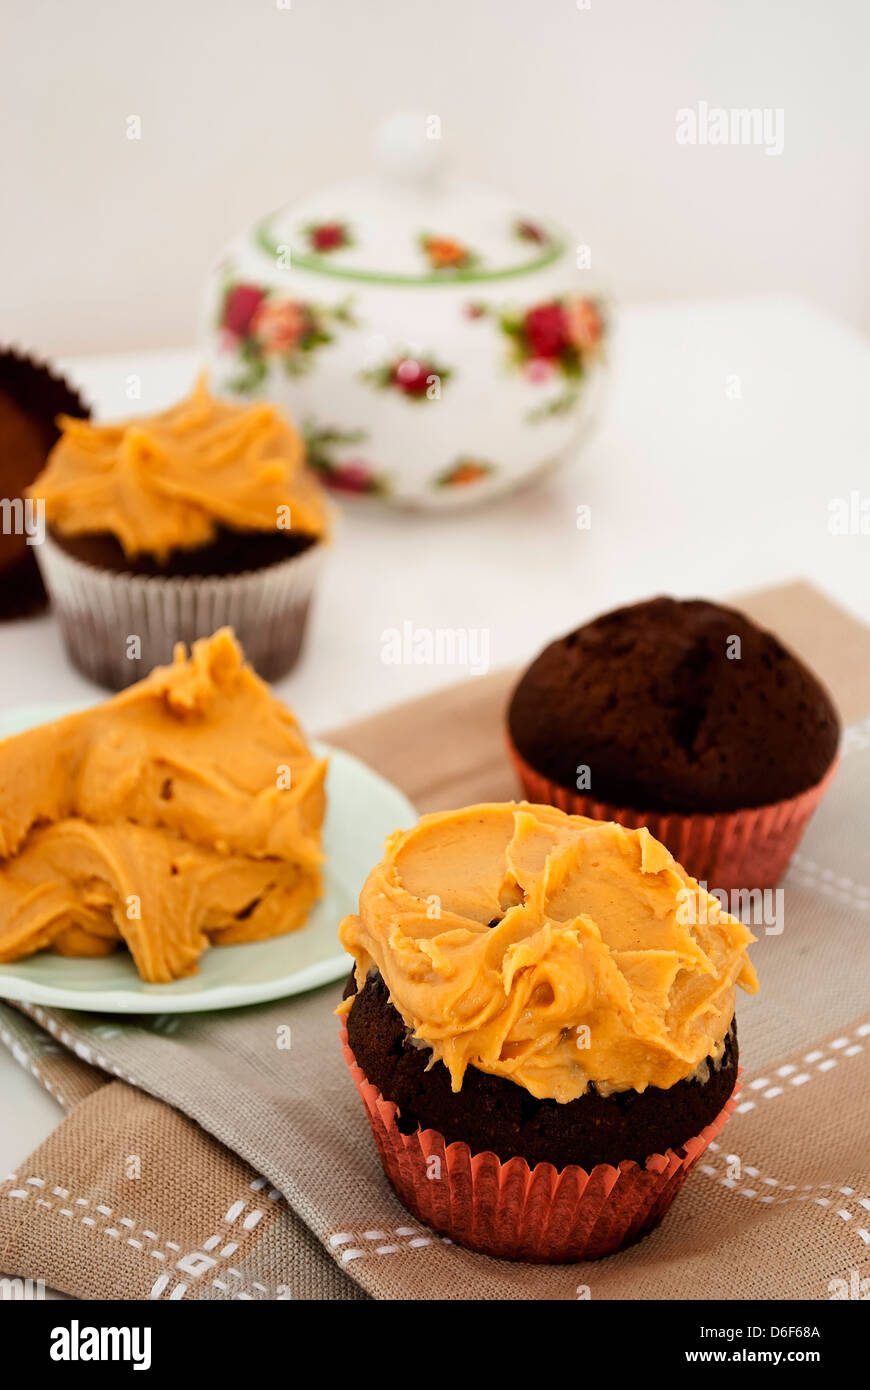 delicious homemade cupcakes with peanut butter icing Stock Photo